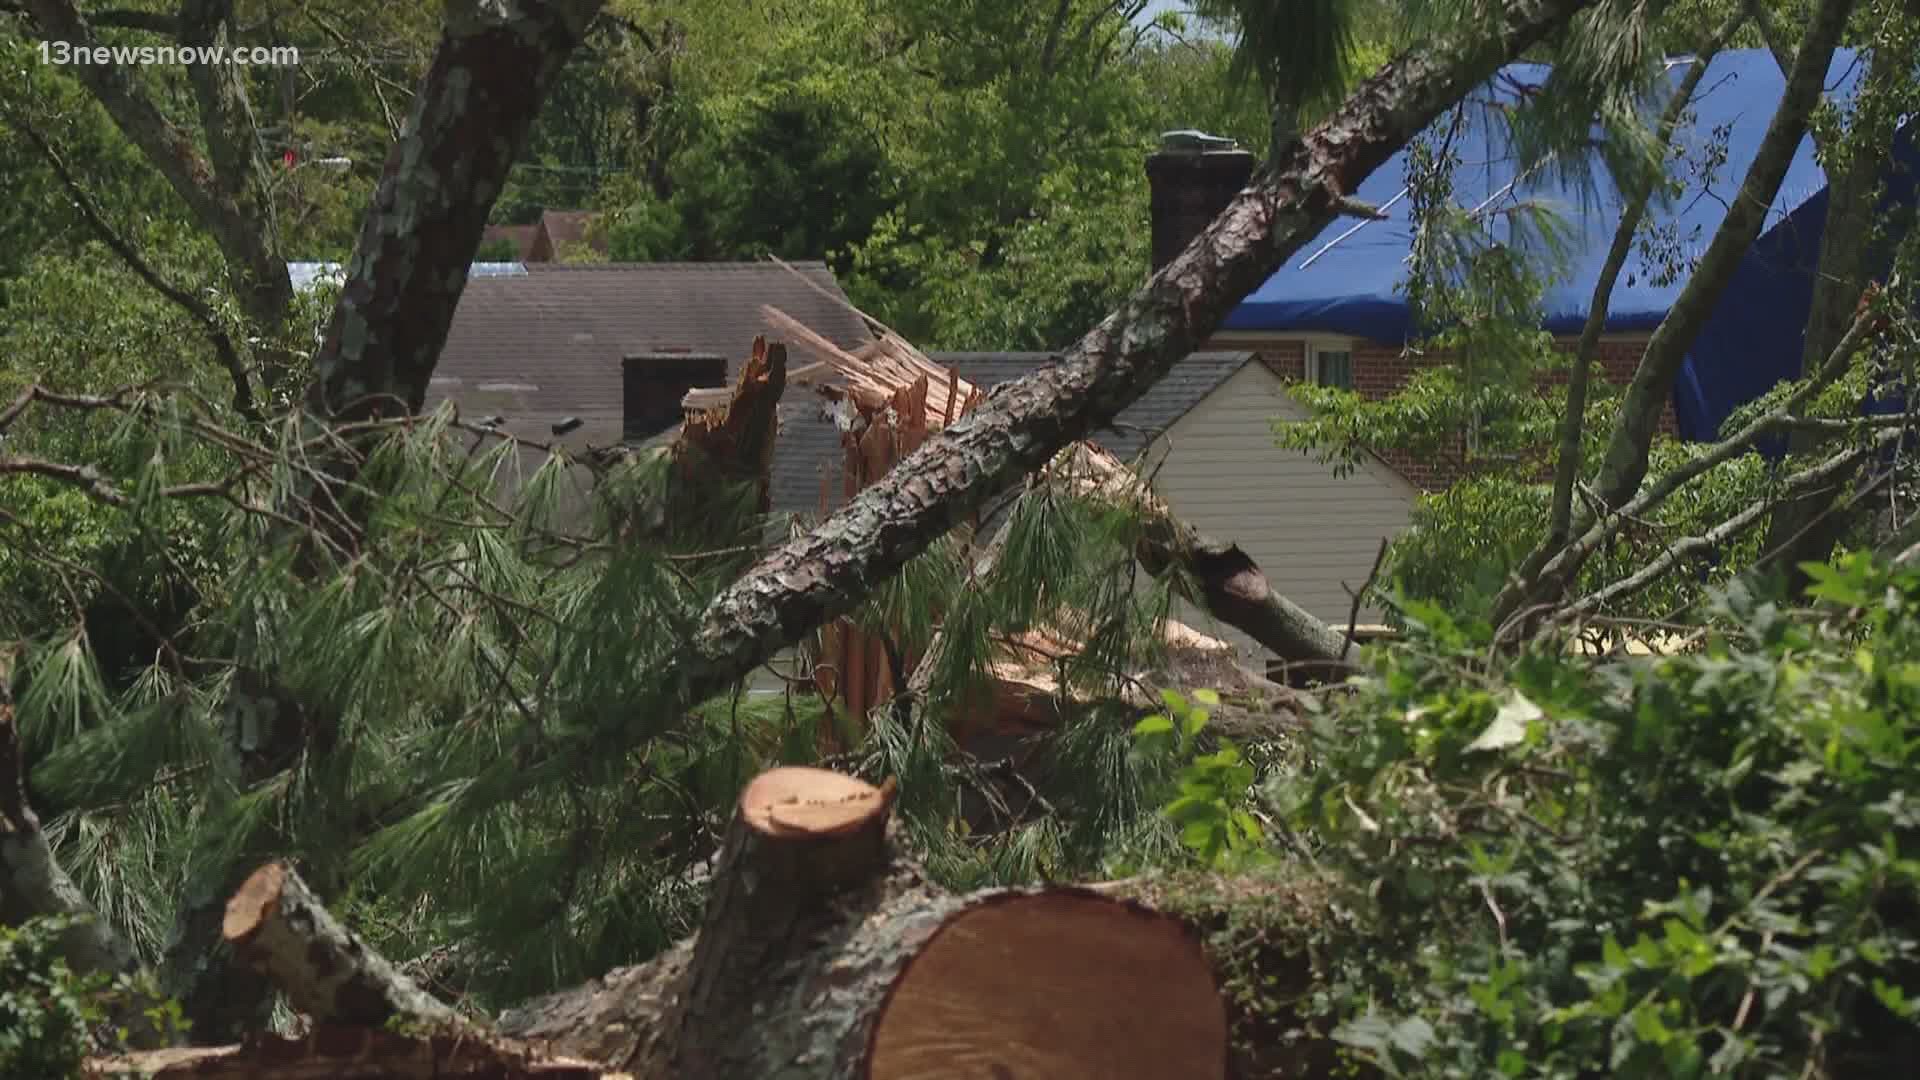 Over the past three days, storm cleanup efforts have been non-stop in Suffolk.